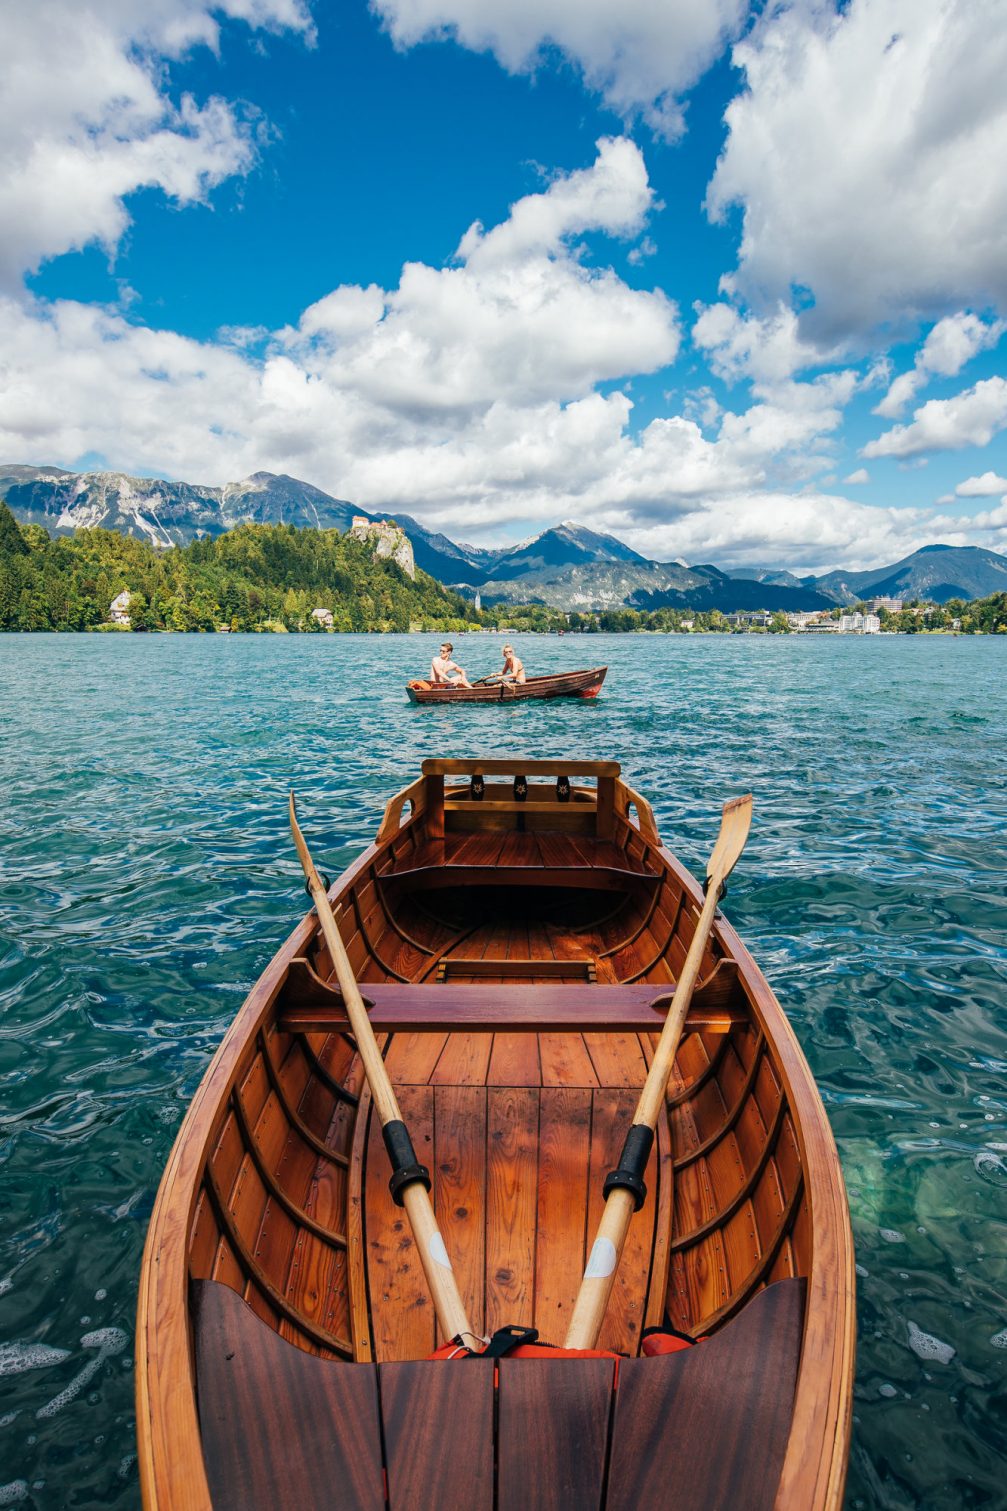 View of Bled Castle from a wooden rowboat on Lake Bled in Slovenia